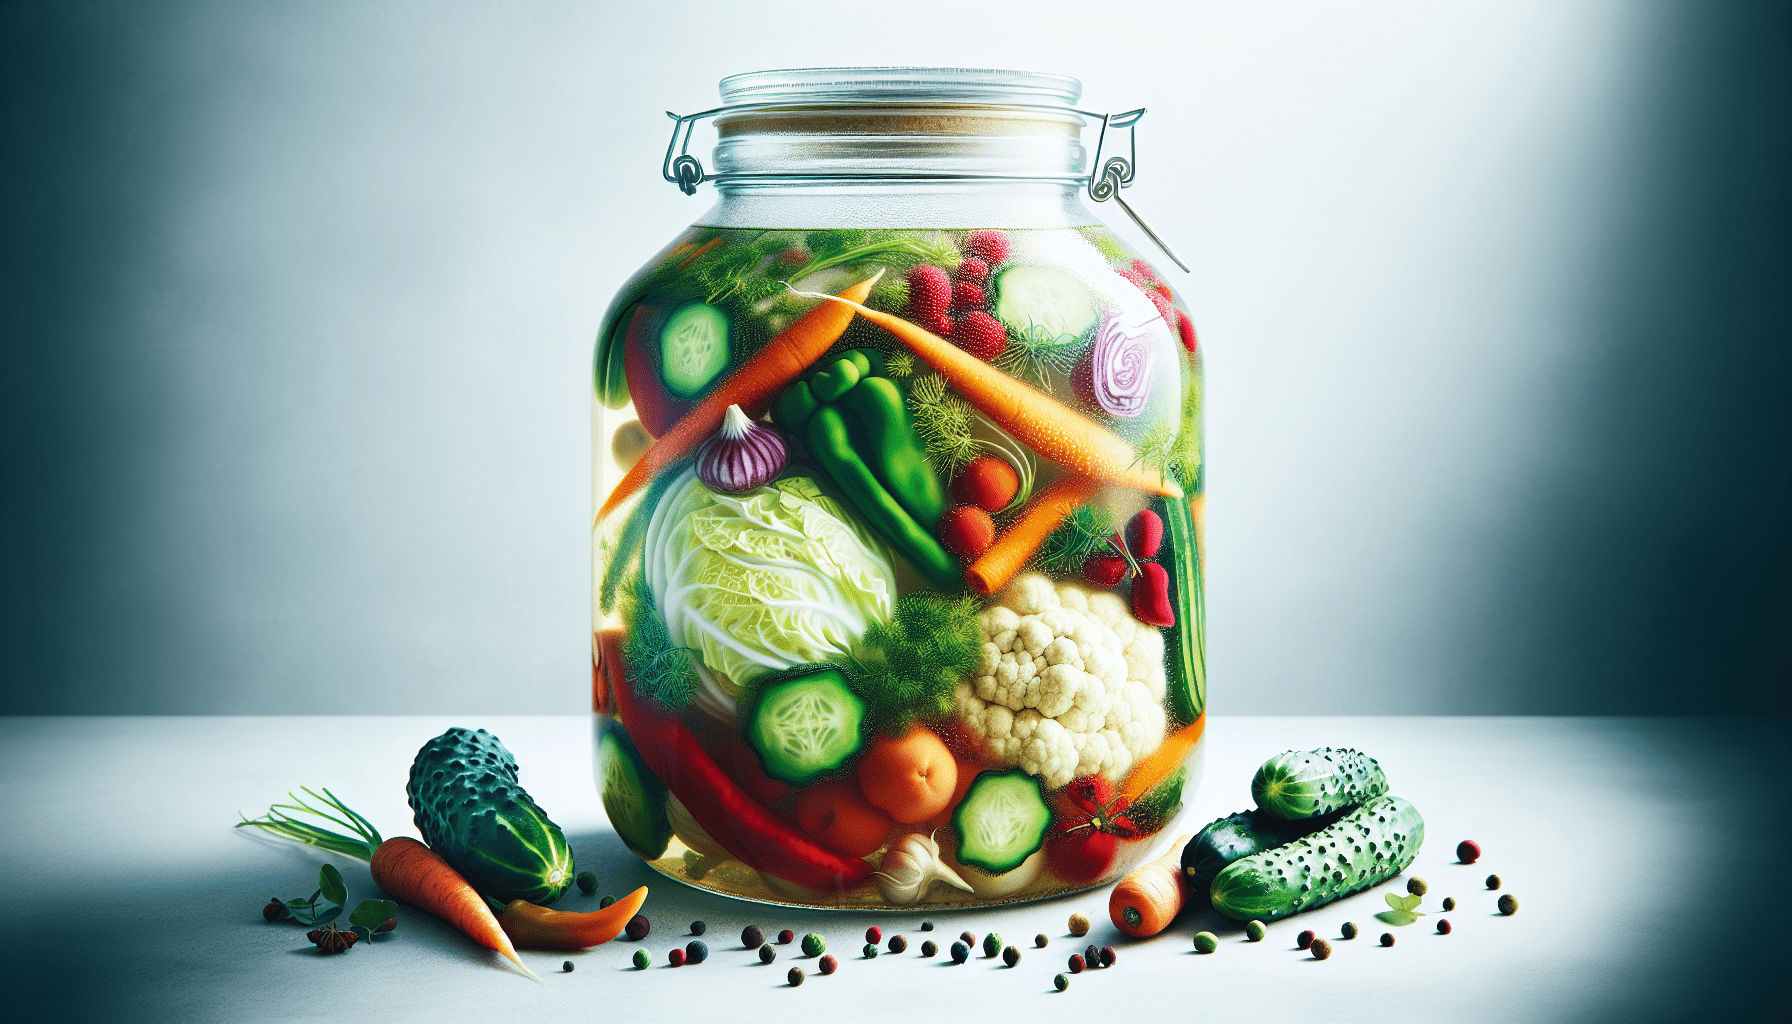 What Are The Basics Of Fermenting Vegetables?